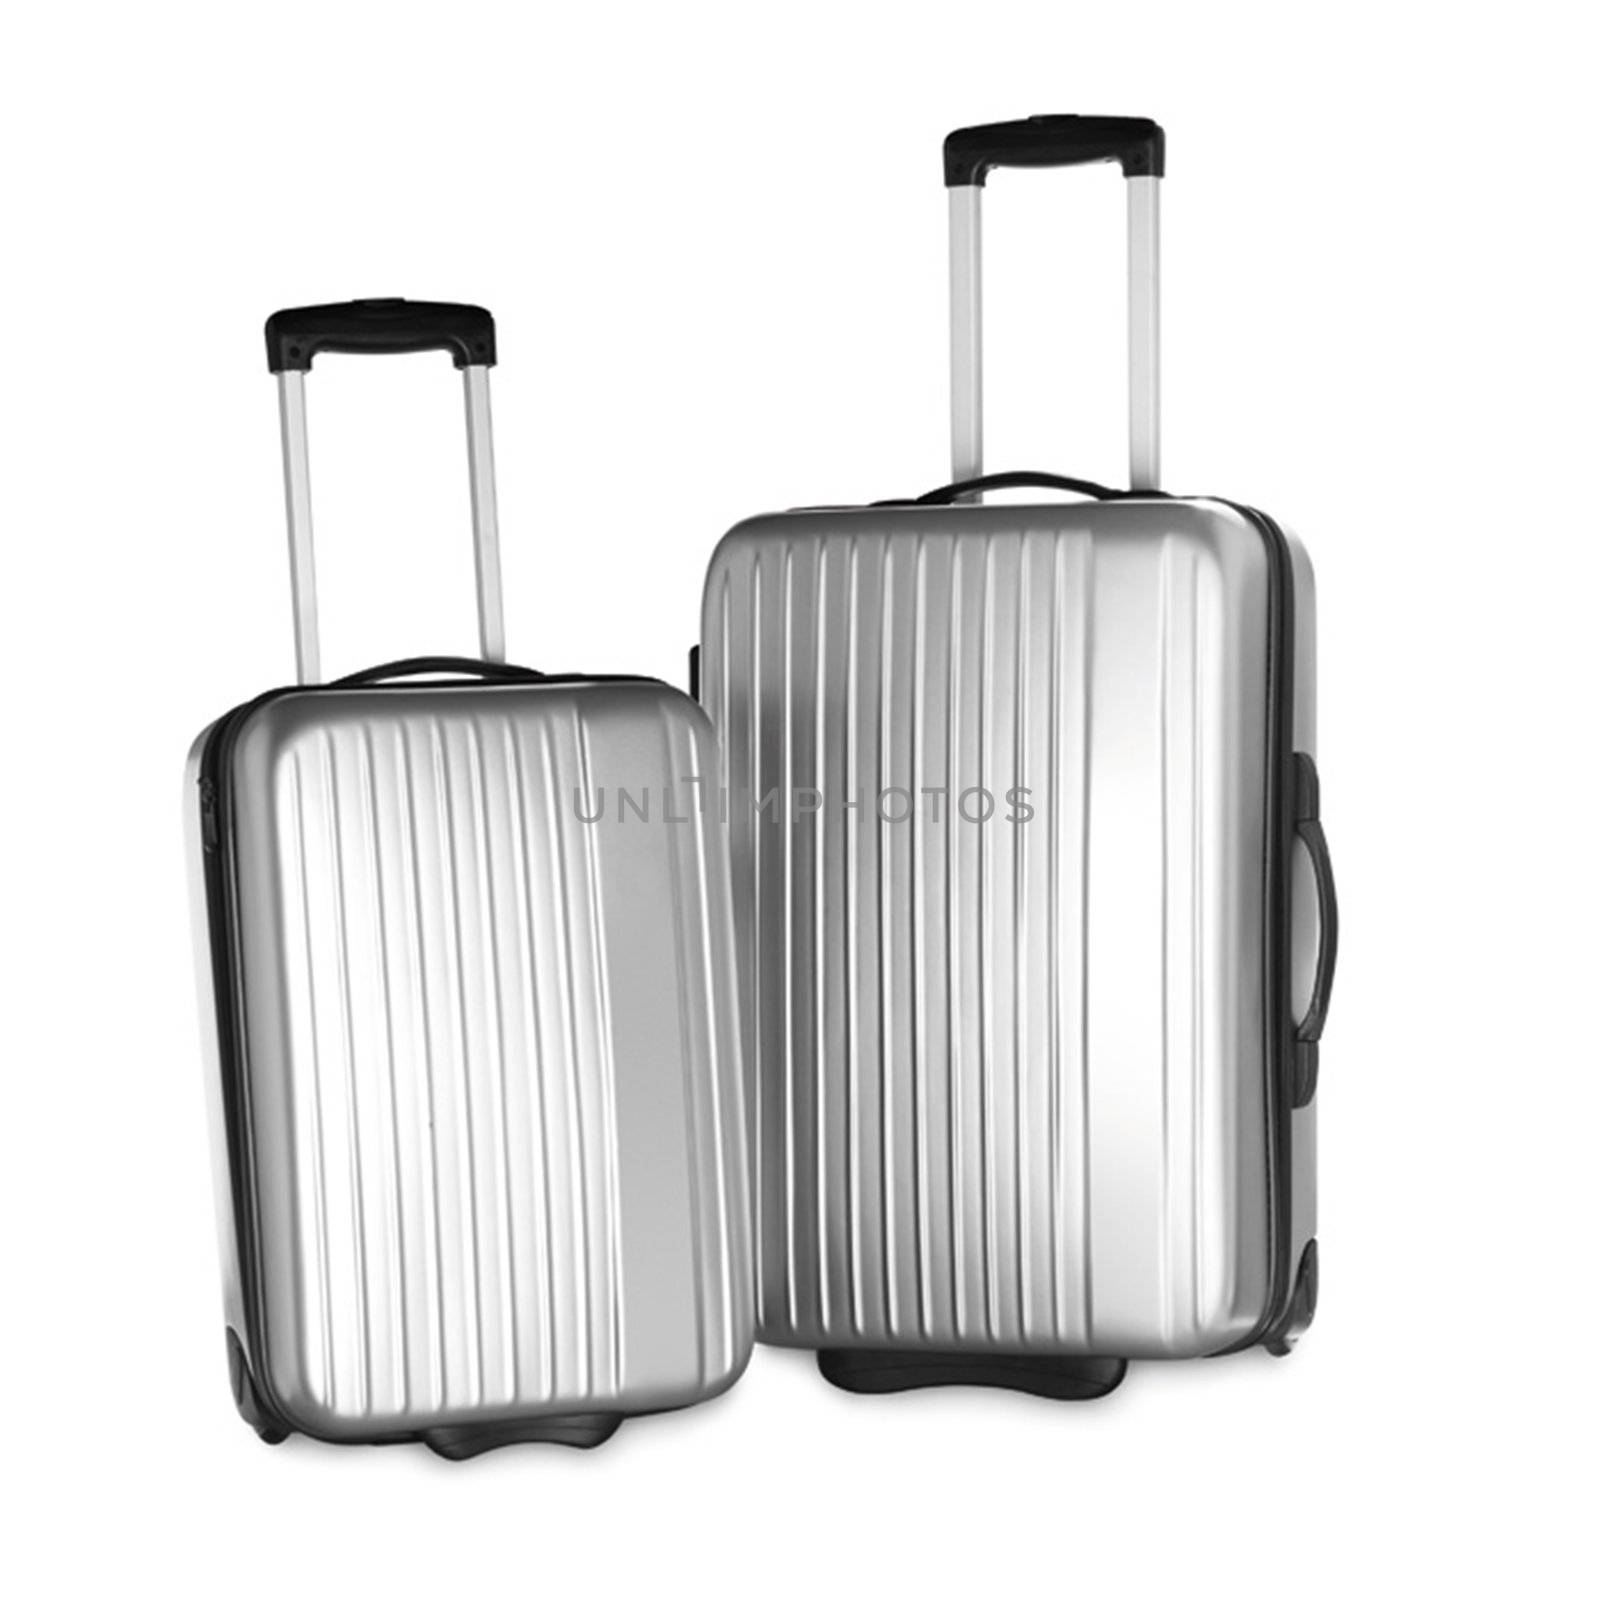 Silver suitcases with wheels